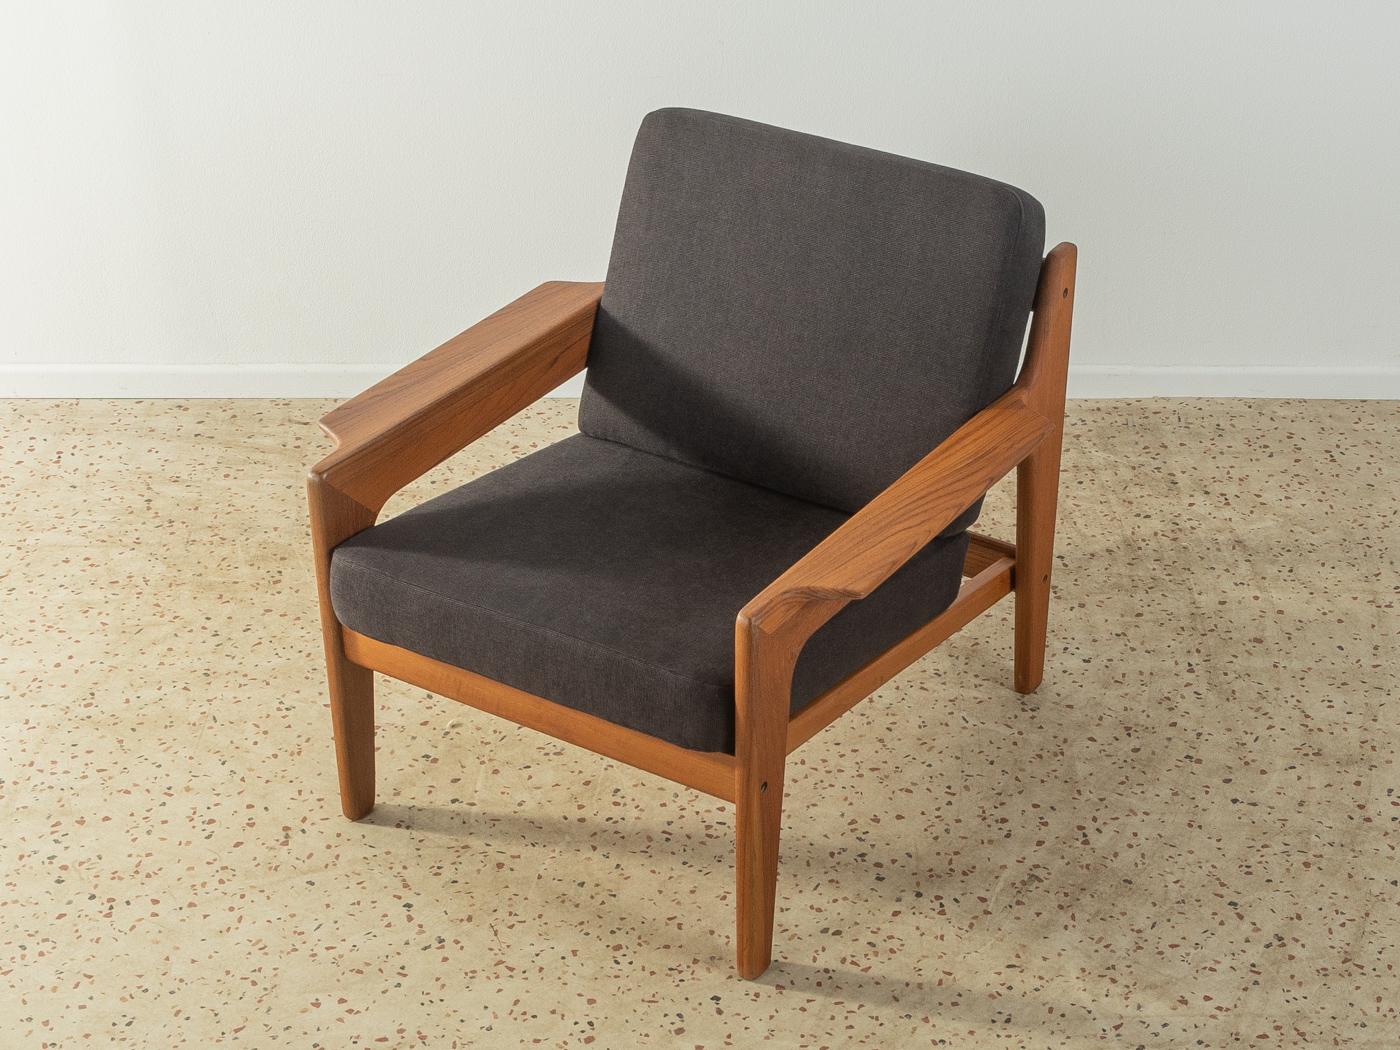 Classic armchair in teak from the 1960s by Arne Wahl Iversen for Komfort. The armchair has been reupholstered and covered with a high-quality fabric in black.

Quality Features:
 accomplished design: perfect proportions and visible attention to